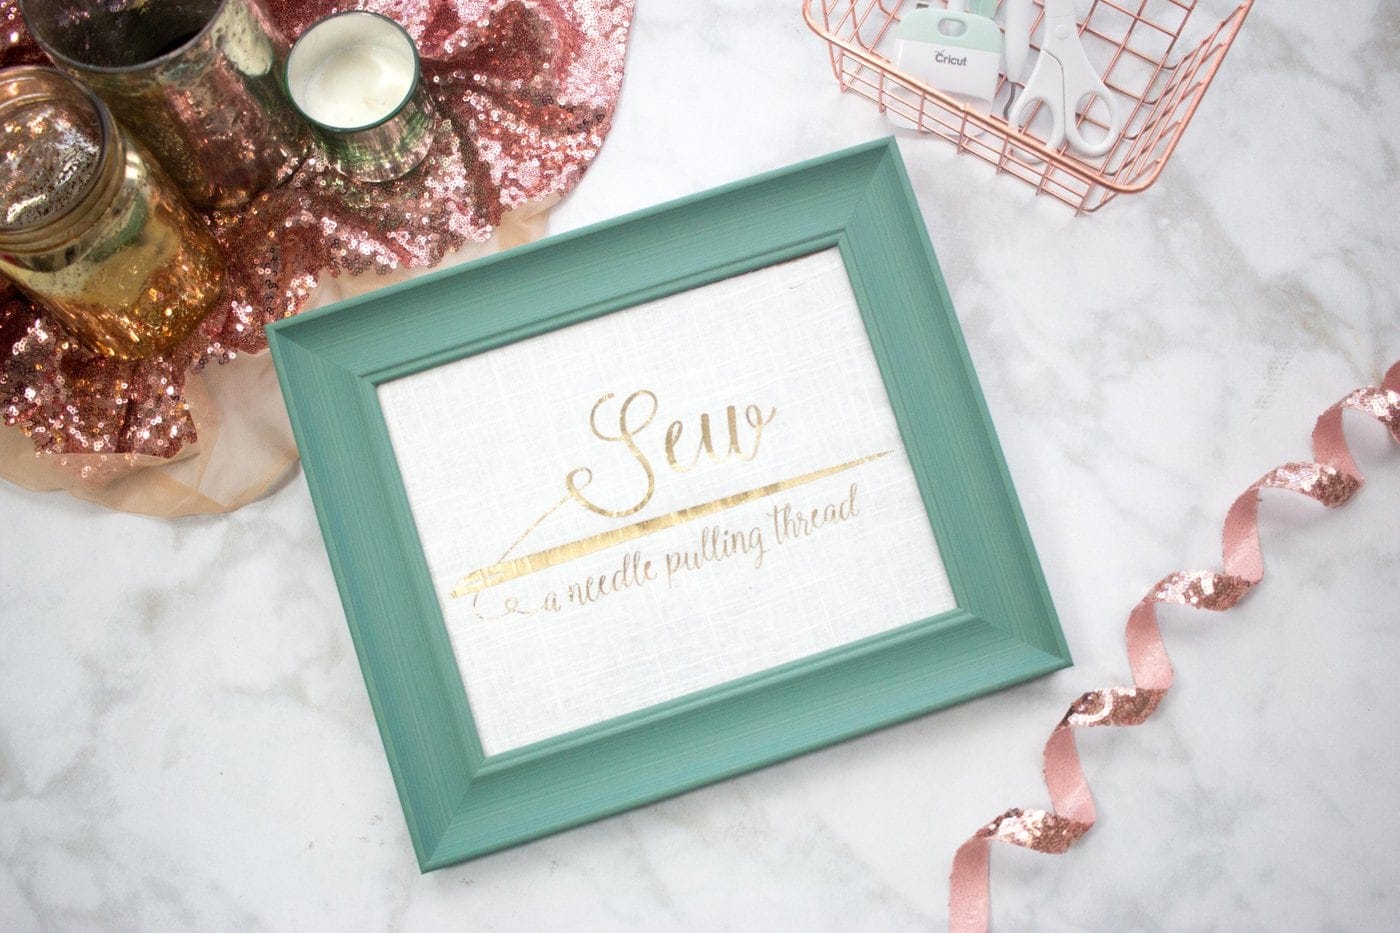 Free Sewing SVG cut file for Cricut Machines- a cute saying for your sewing room decor! 